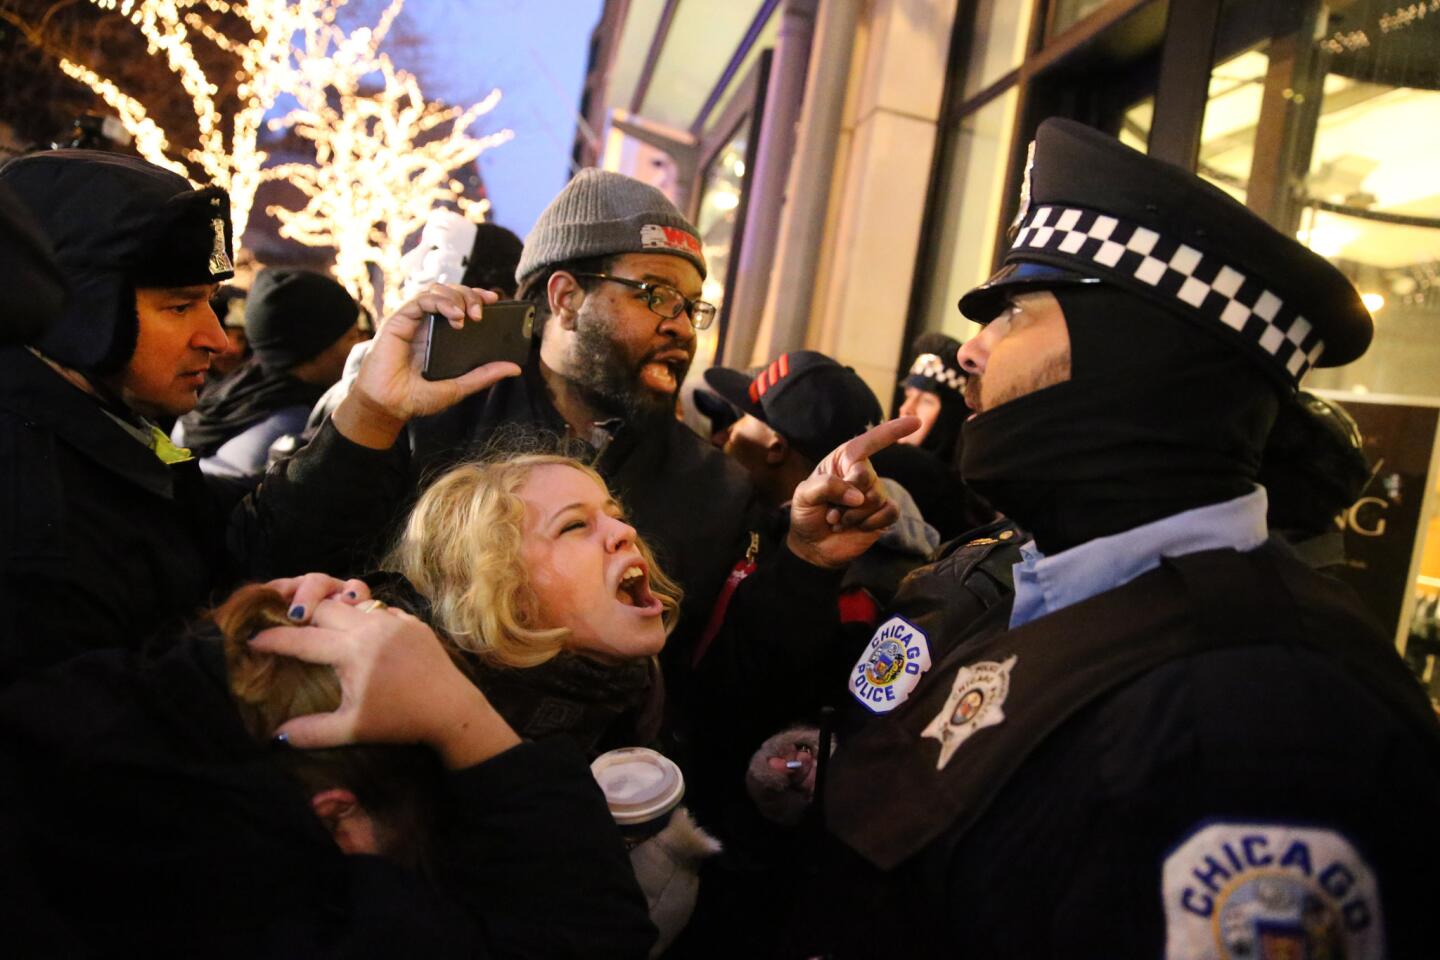 Protesters shout at a police officer on Nov. 27, 2015, as marchers gathered on North Michigan Avenue to express outrage over the shooting death of Laquan McDonald.